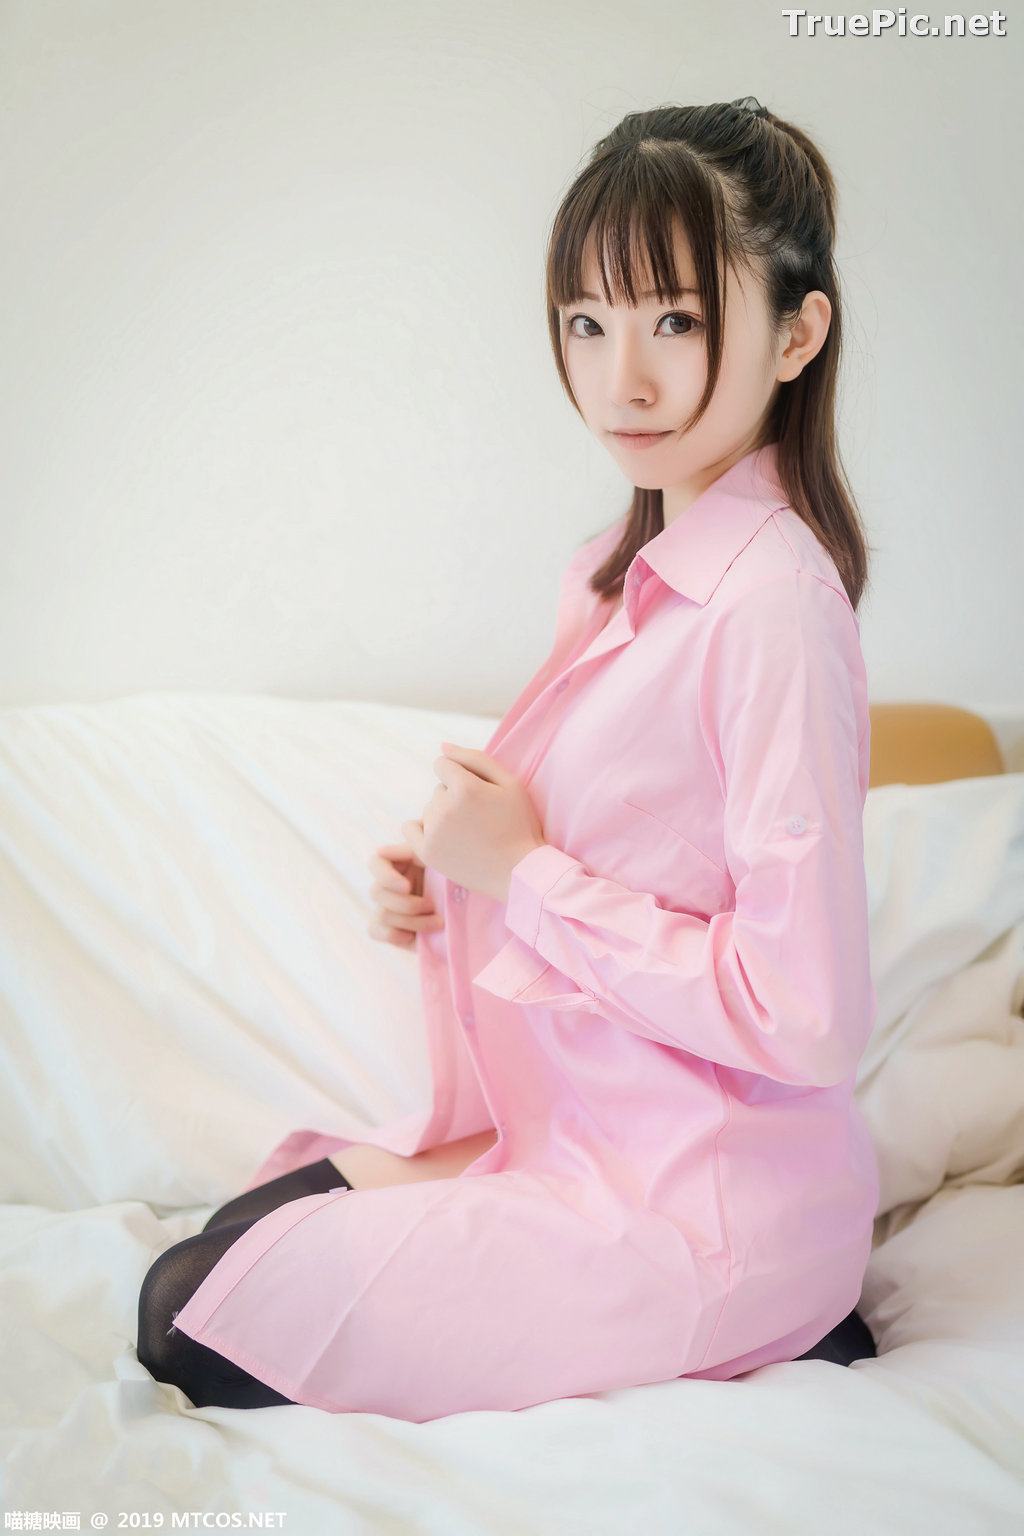 Image [MTCos] 喵糖映画 Vol.022 – Chinese Model – Pink Shirt and Black Stockings - TruePic.net - Picture-24